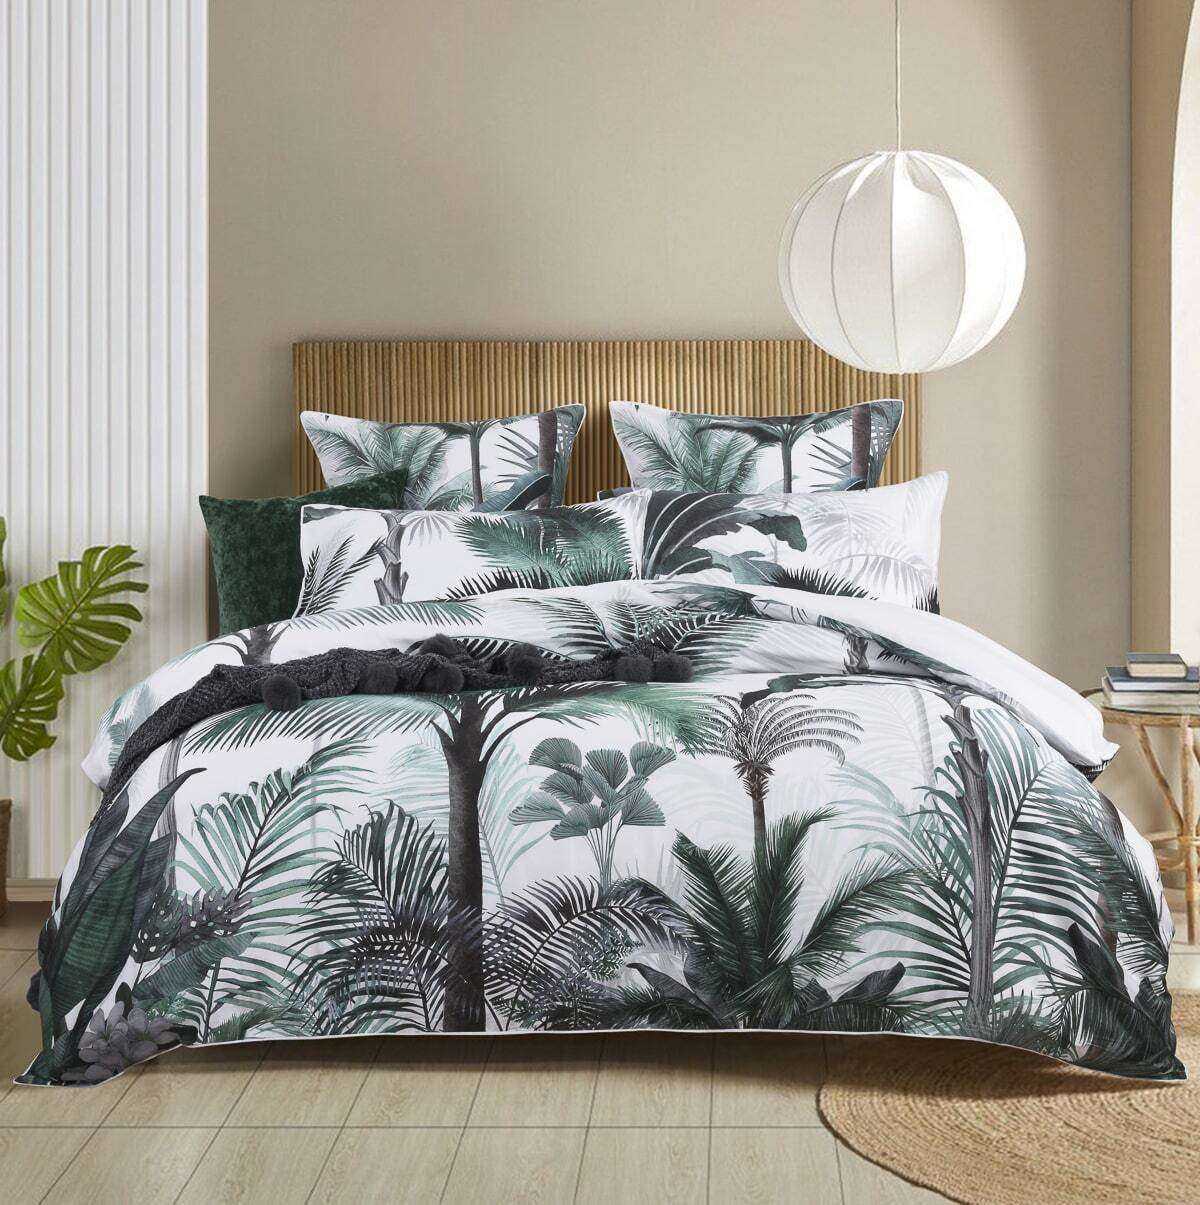 Quilt Covers & Sets | Manchester Collection